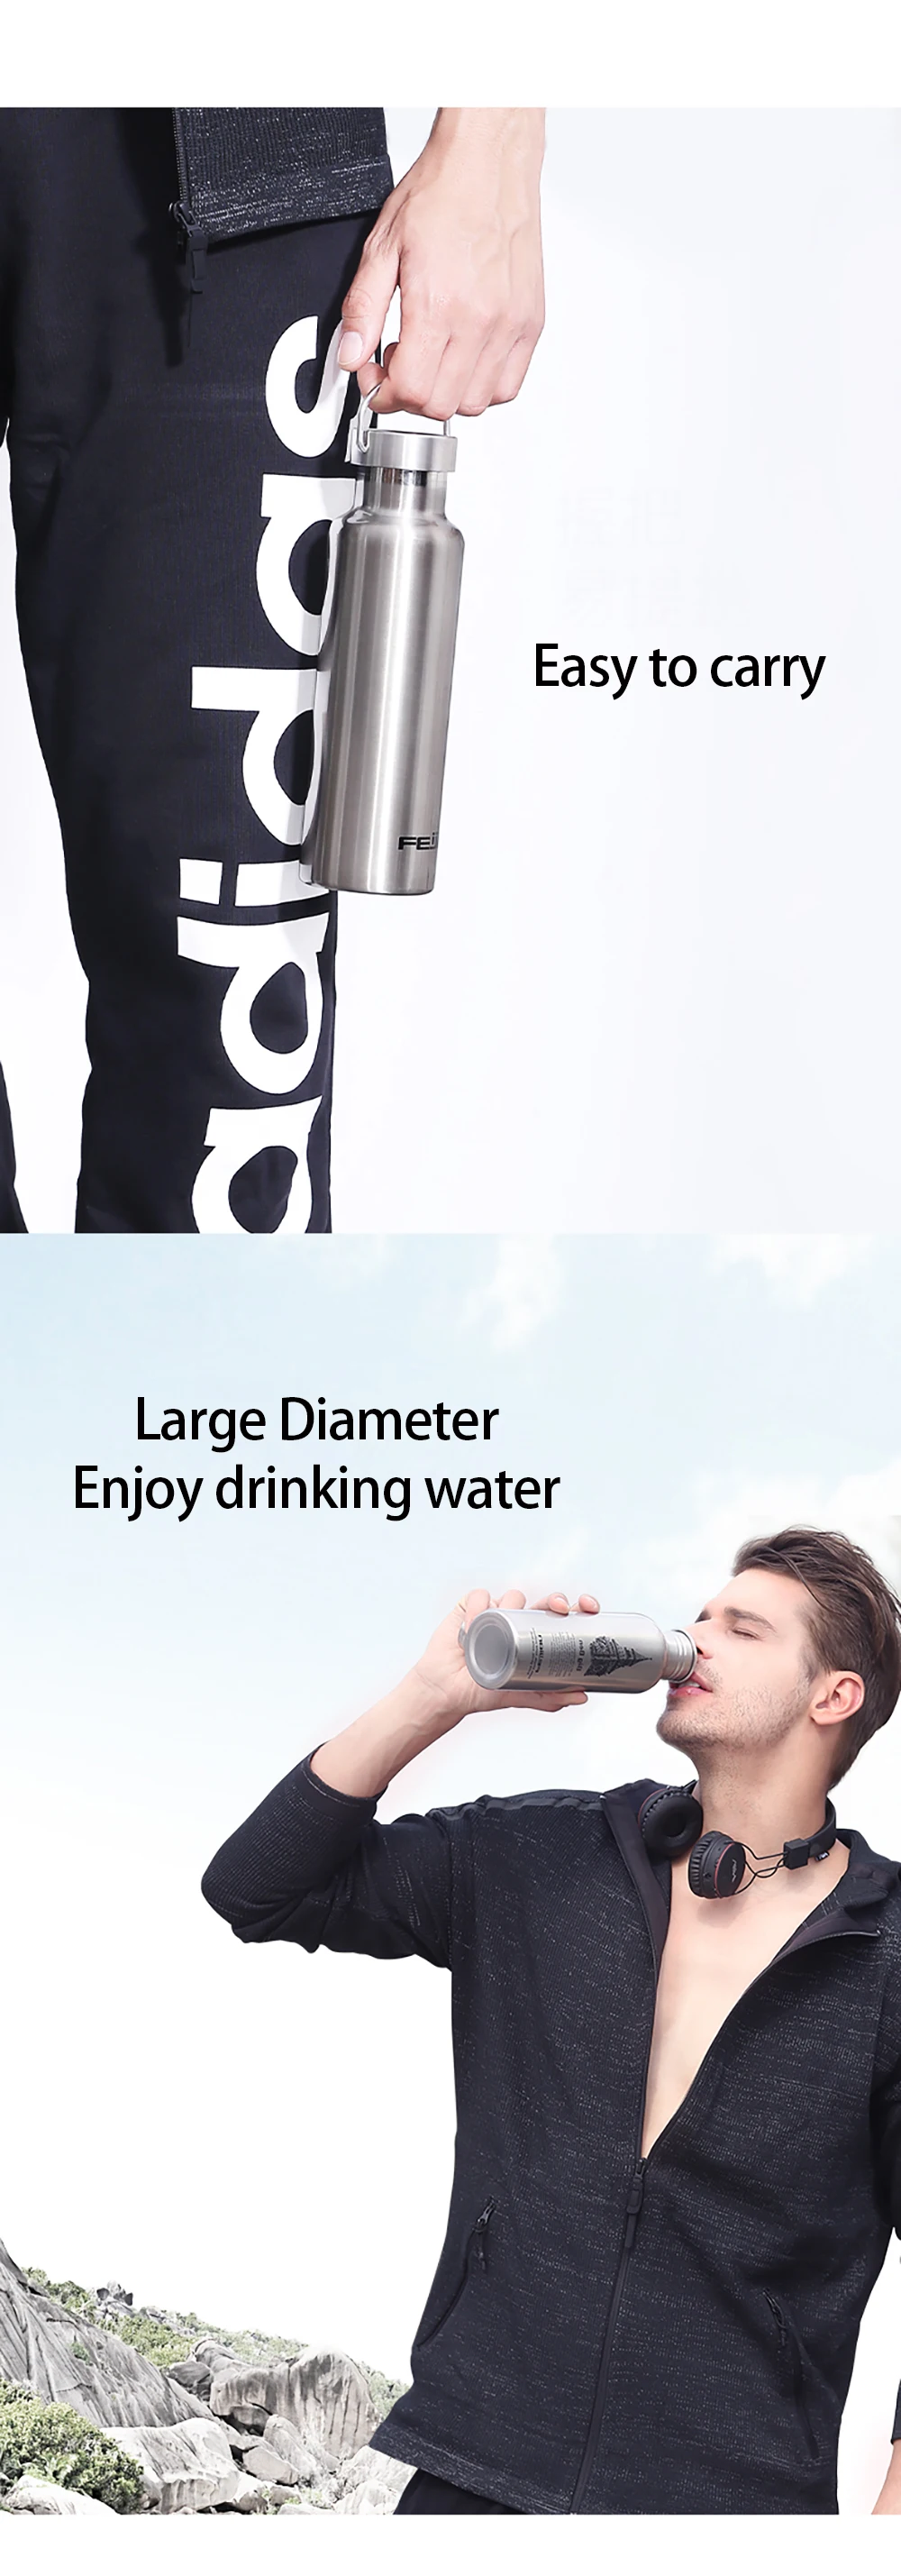 Feijian Sports Thermos bottle Stainless Steel Insulated Outdoor Drinking Water Bottle Vacuum flask travel kettle shaker